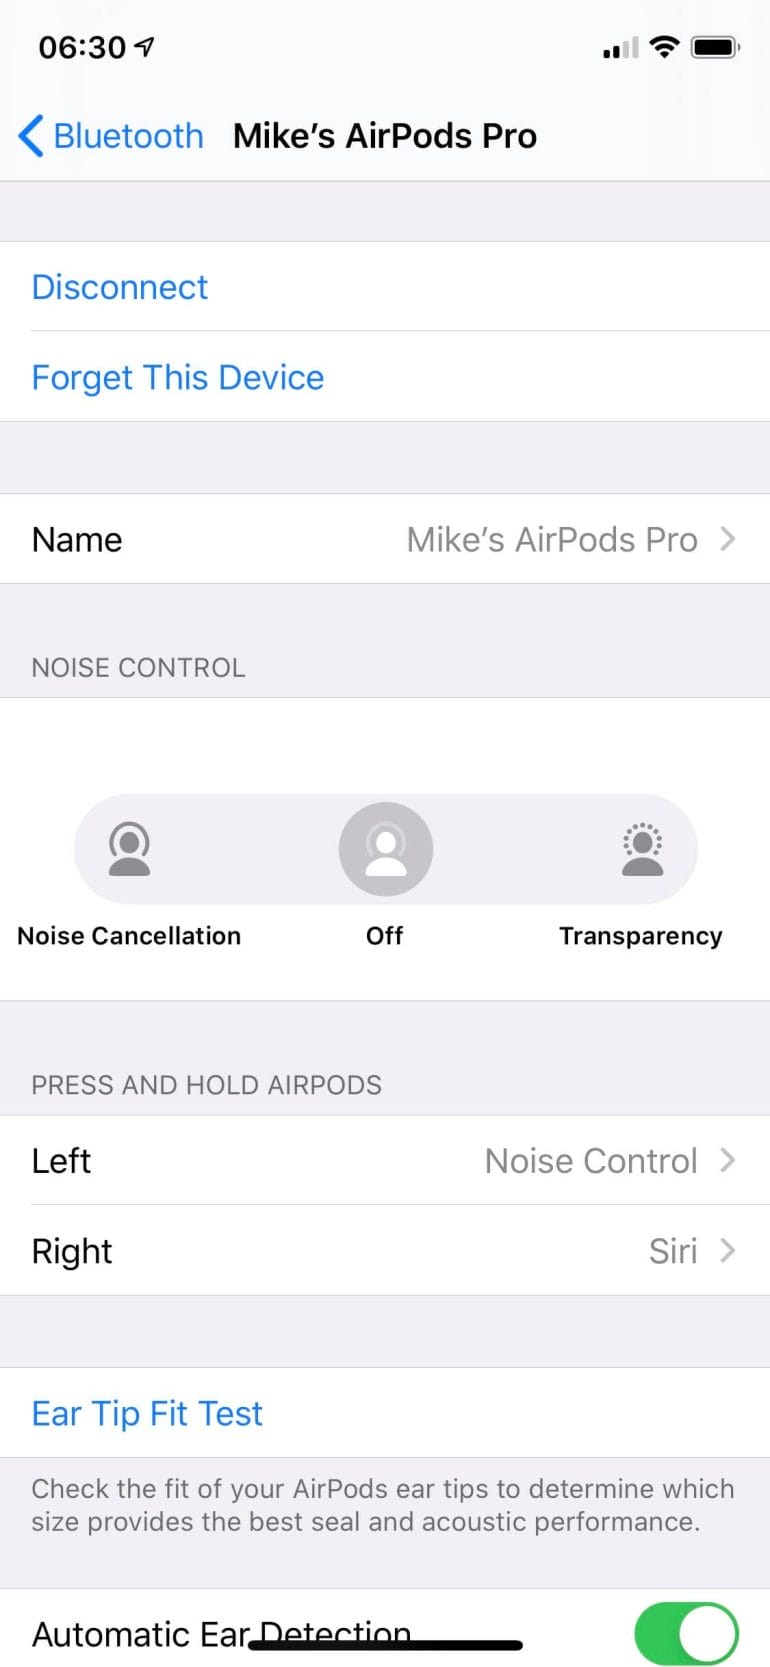 AirPods Pro configuration in Settings panel